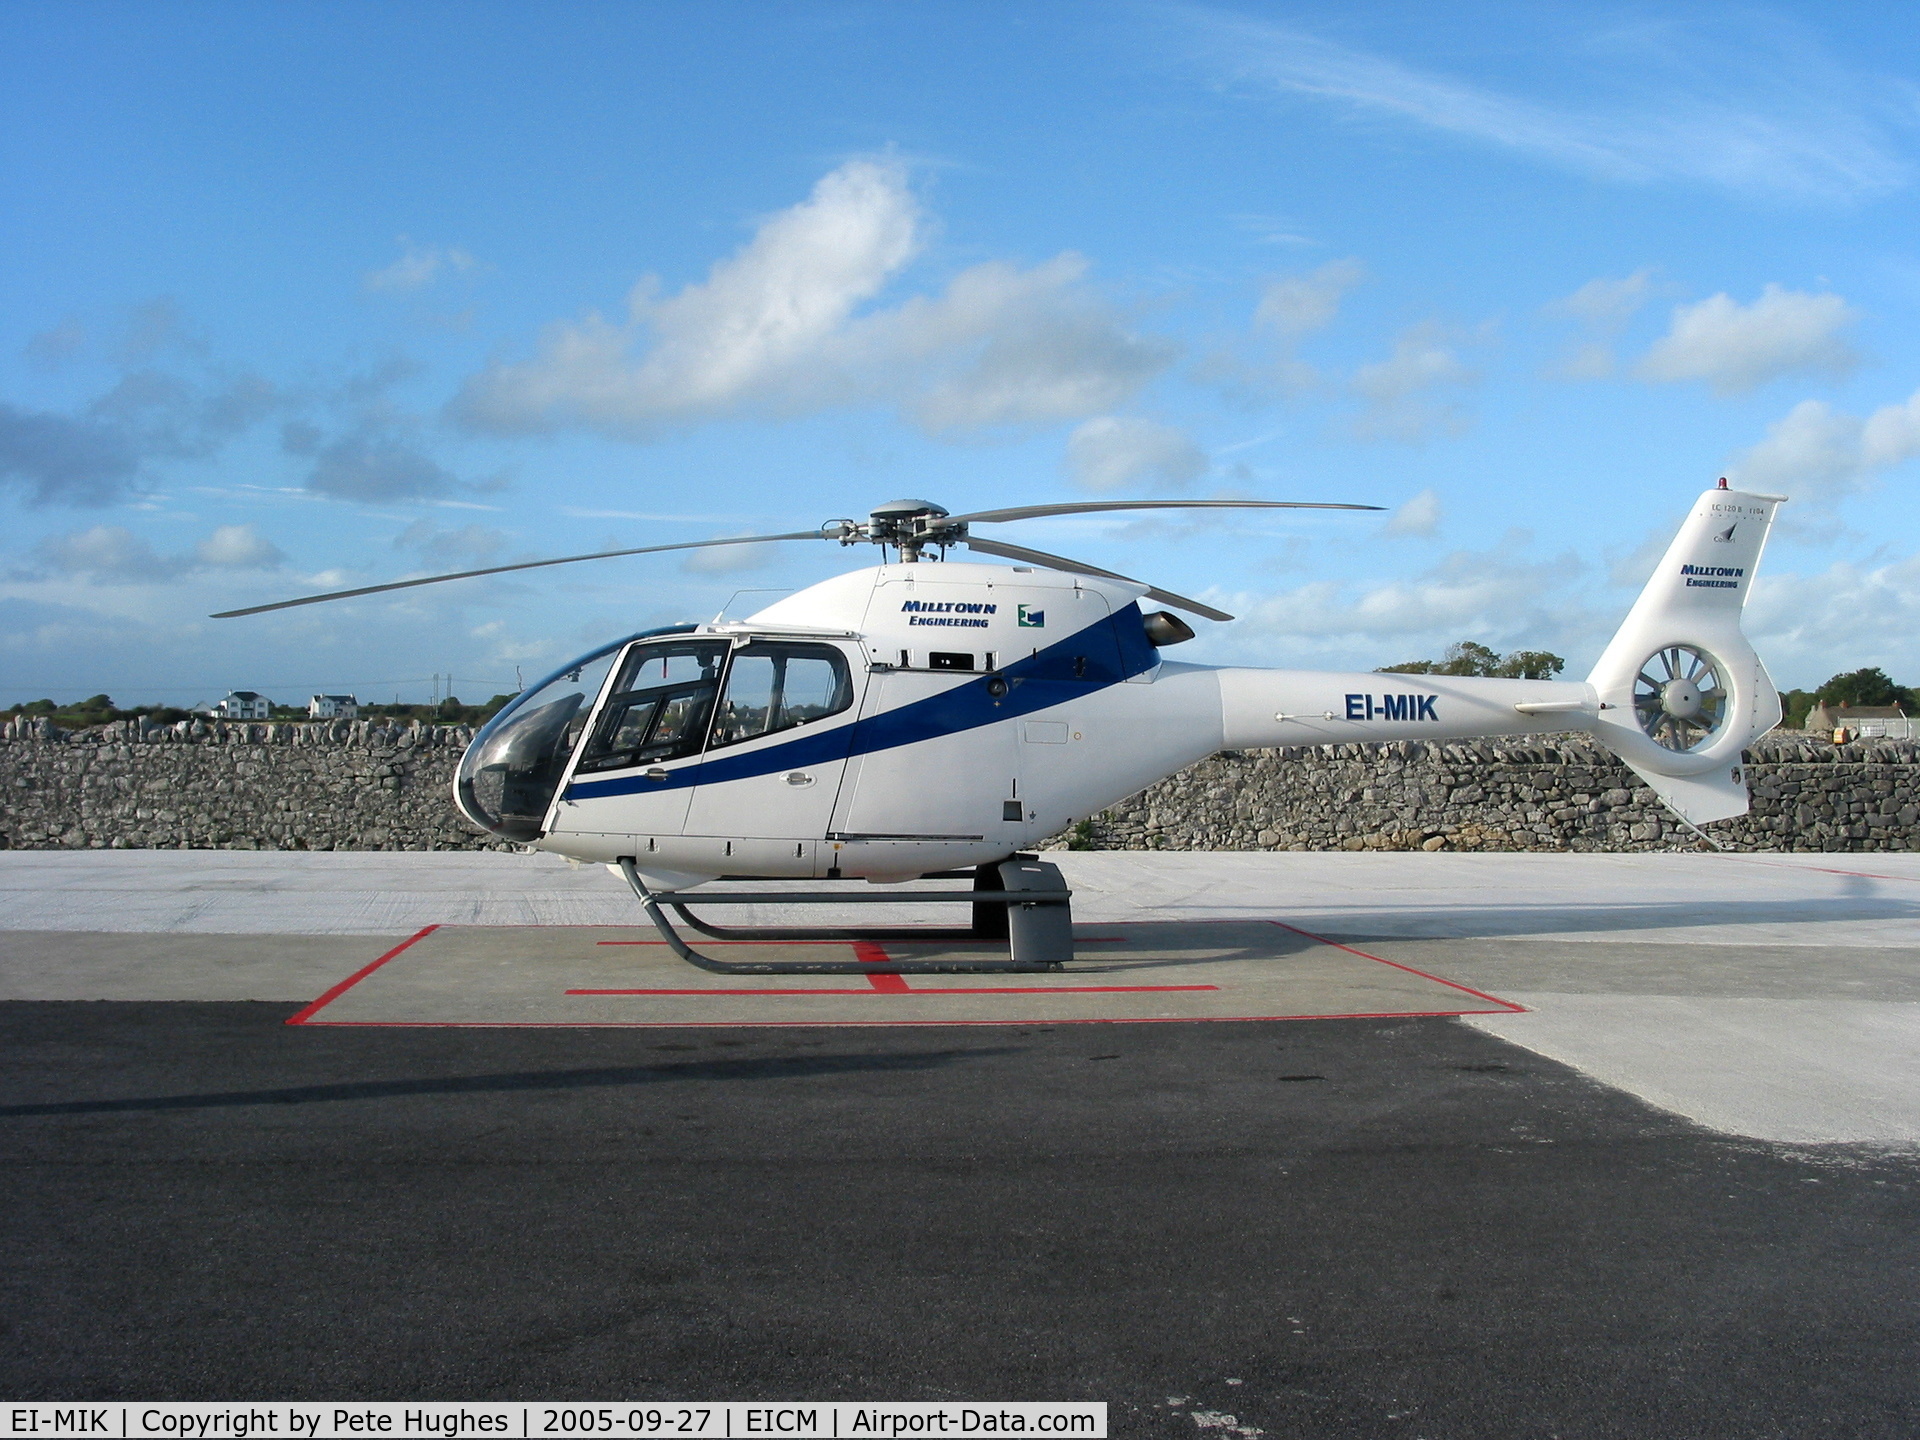 EI-MIK, 2000 Eurocopter EC-120B Colibri C/N 1104, at the heliport near Galway airport